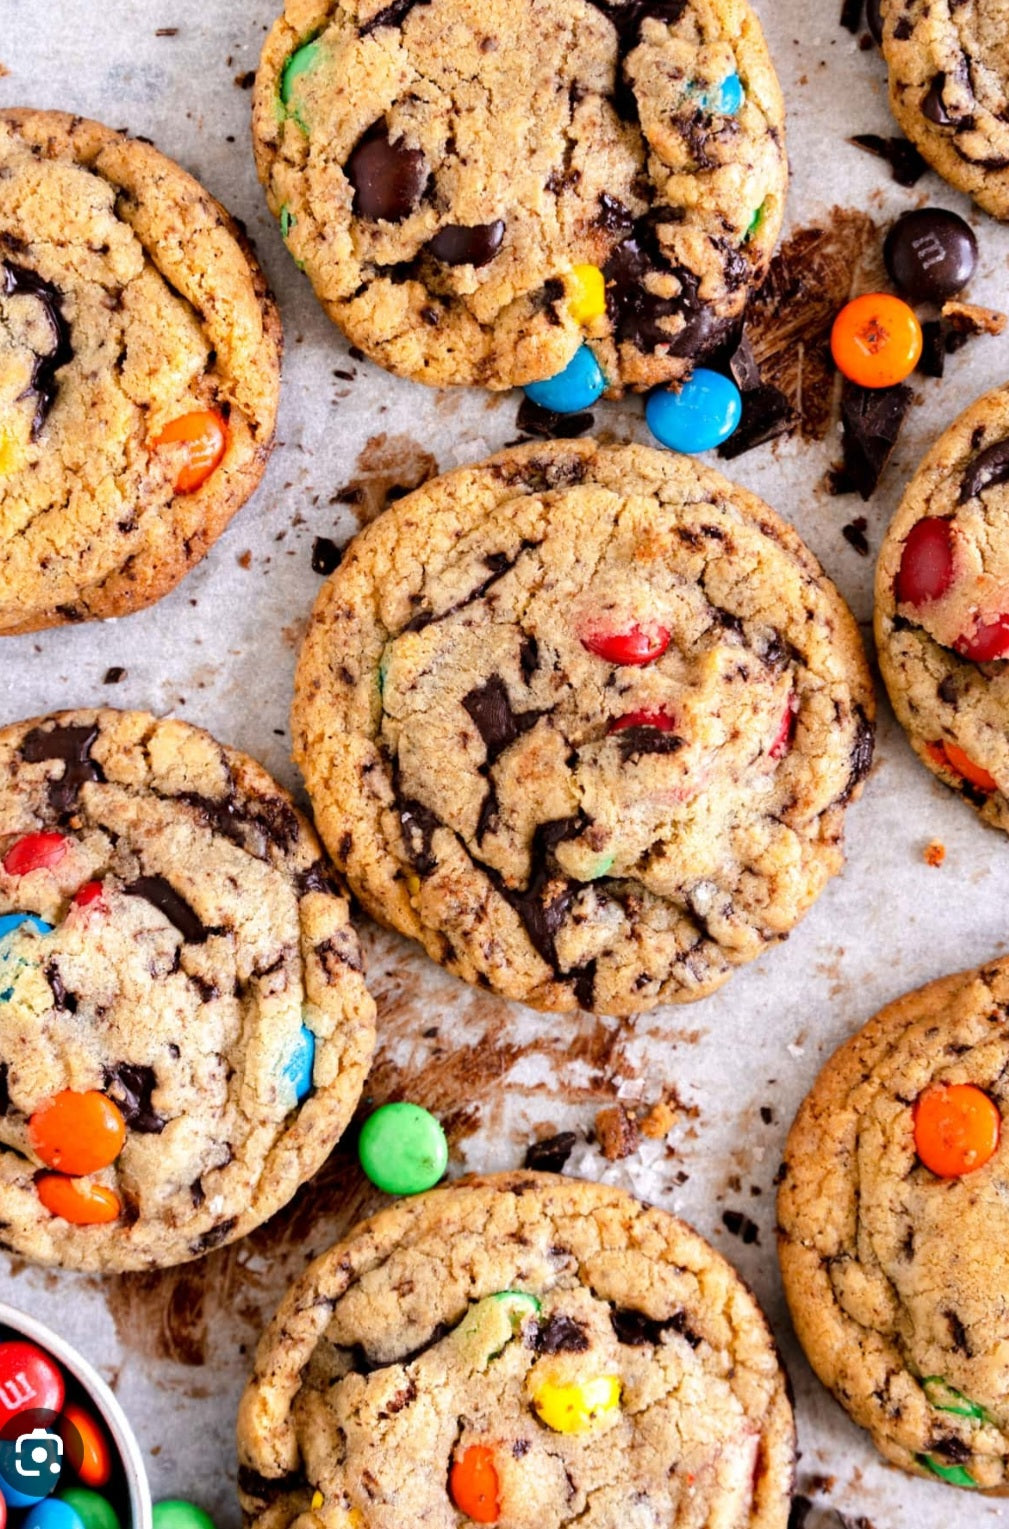 Chocolate Chip M&M Cookie Baking Class (Kids) Sunday, May 19th. 2pm-4pm.